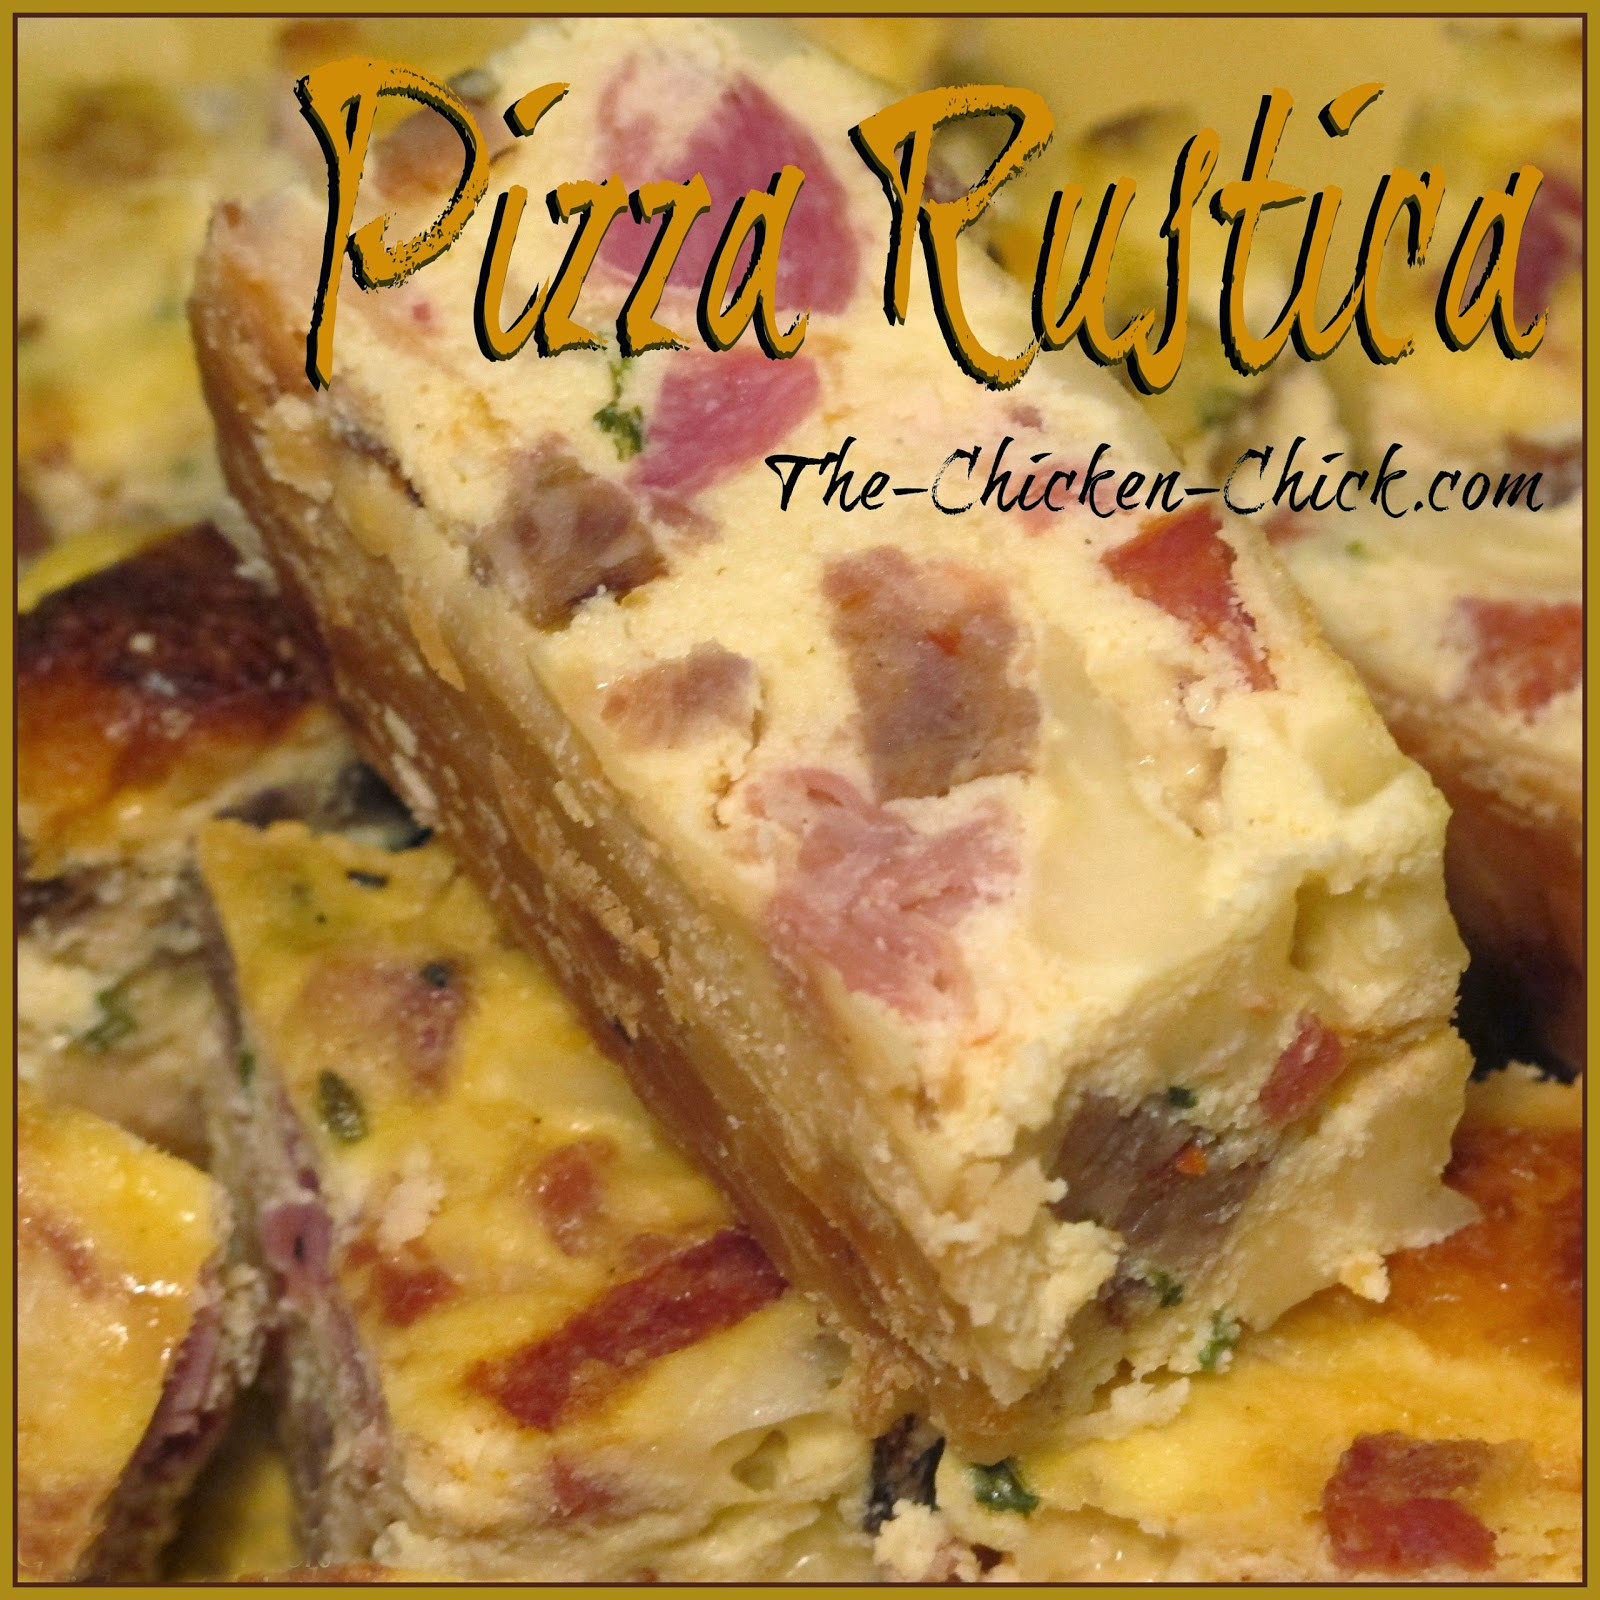 Italian Easter Dinner Traditions
 The Chicken Chick Pizza Rustica aka Pizza Gain a